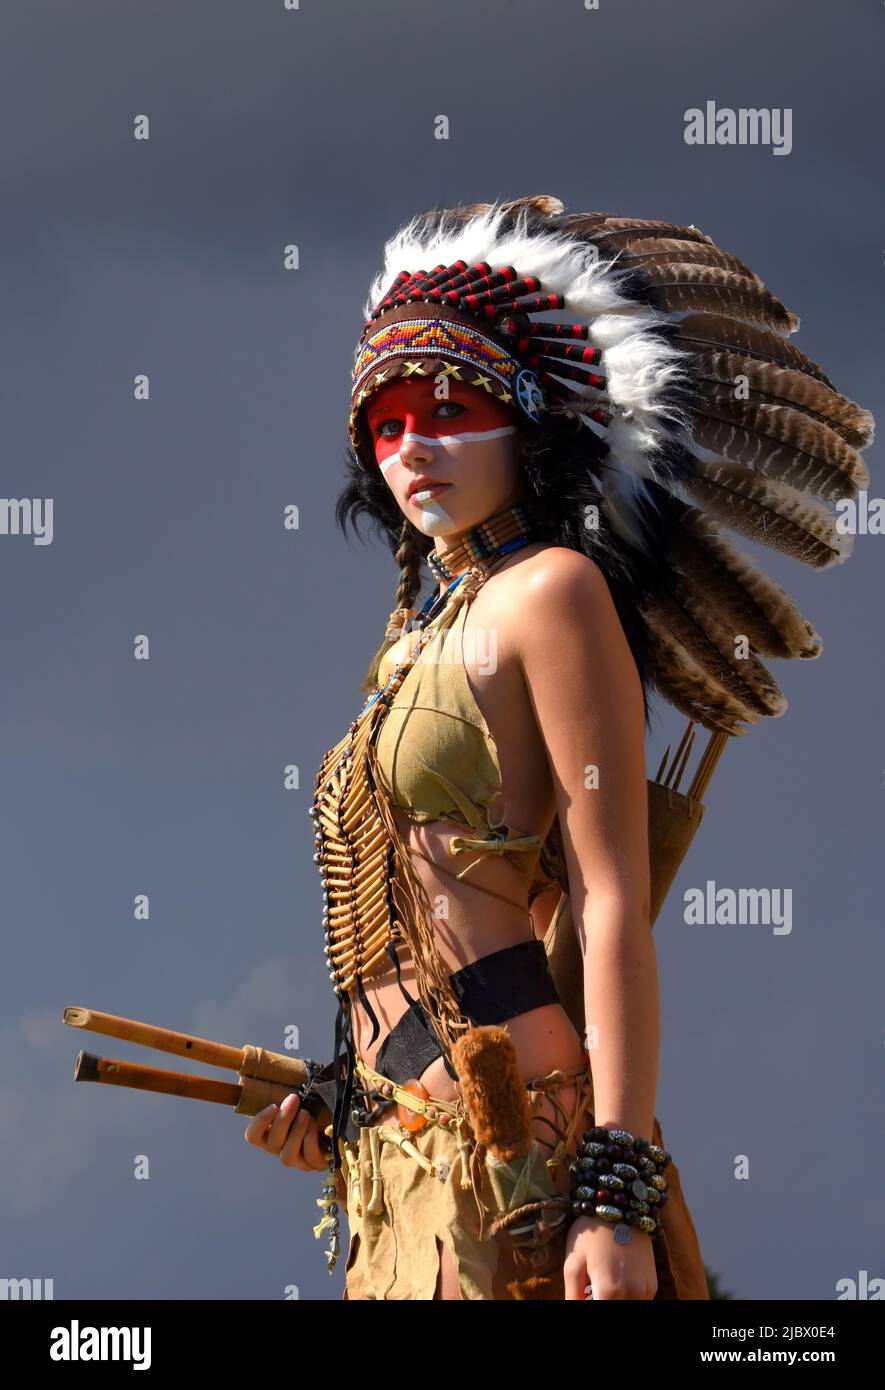 A native American Indian woman is standing in front of grey She a feathered headdress and has traditional clothing on Stock Photo - Alamy